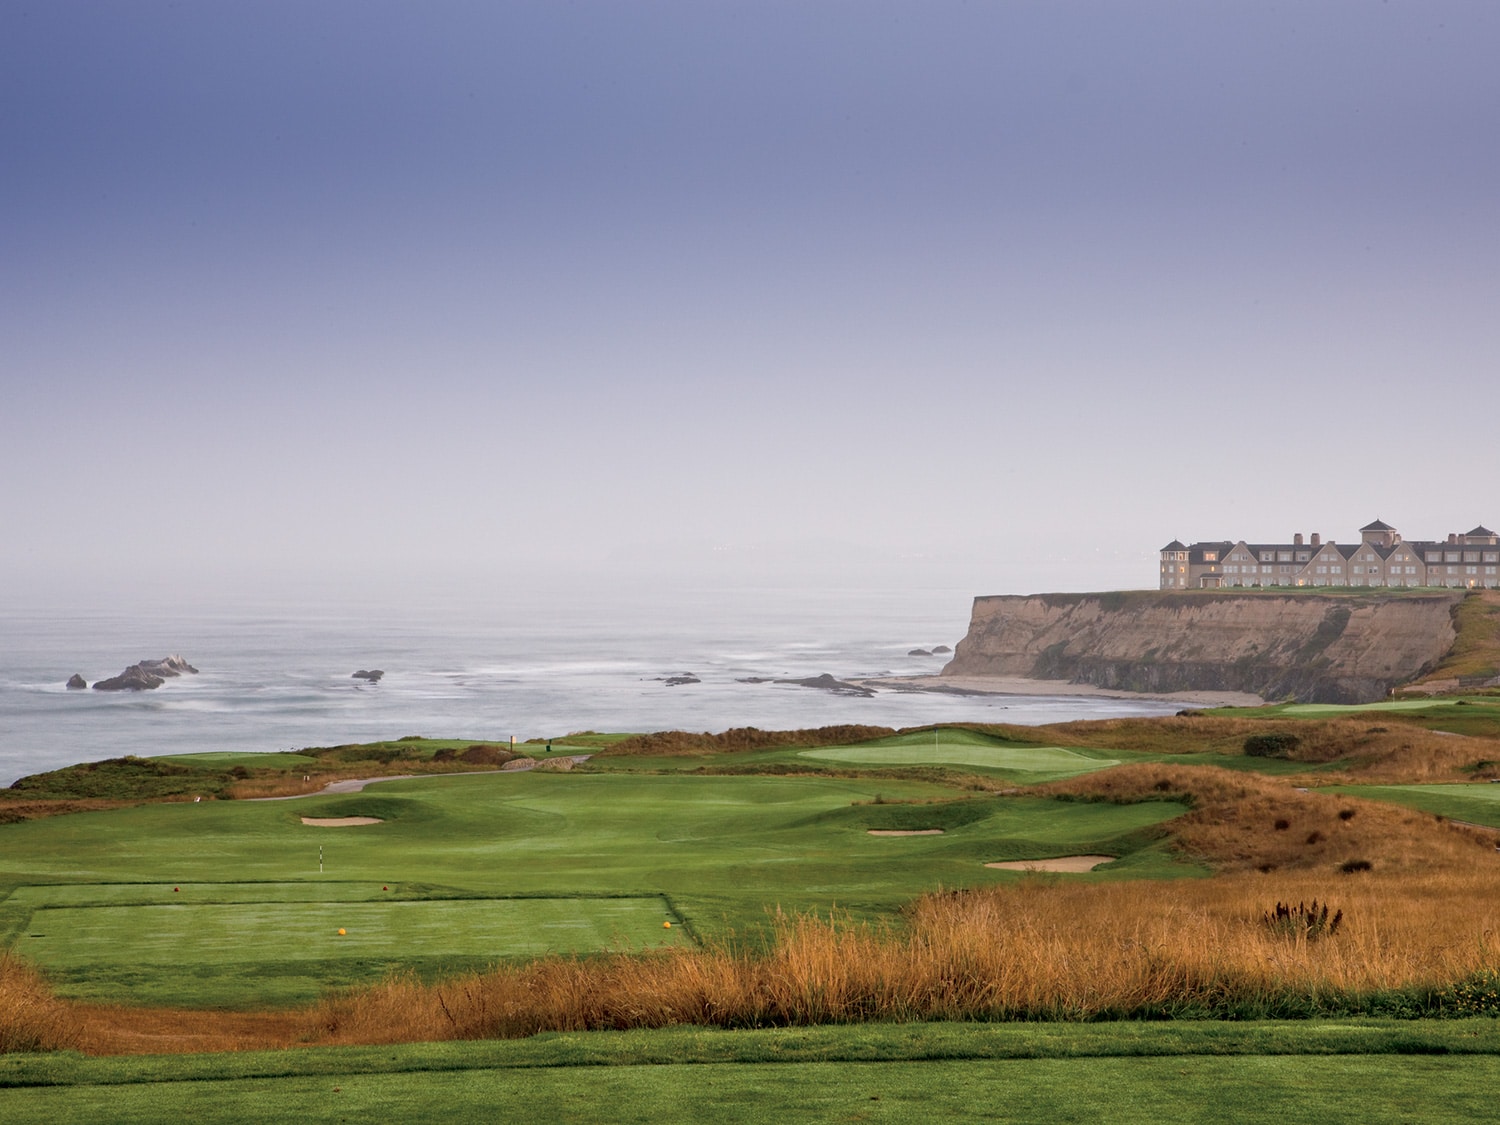 The 16th hole of the Ocean Course at The Ritz-Carlton Half Moon Bay resort in California.